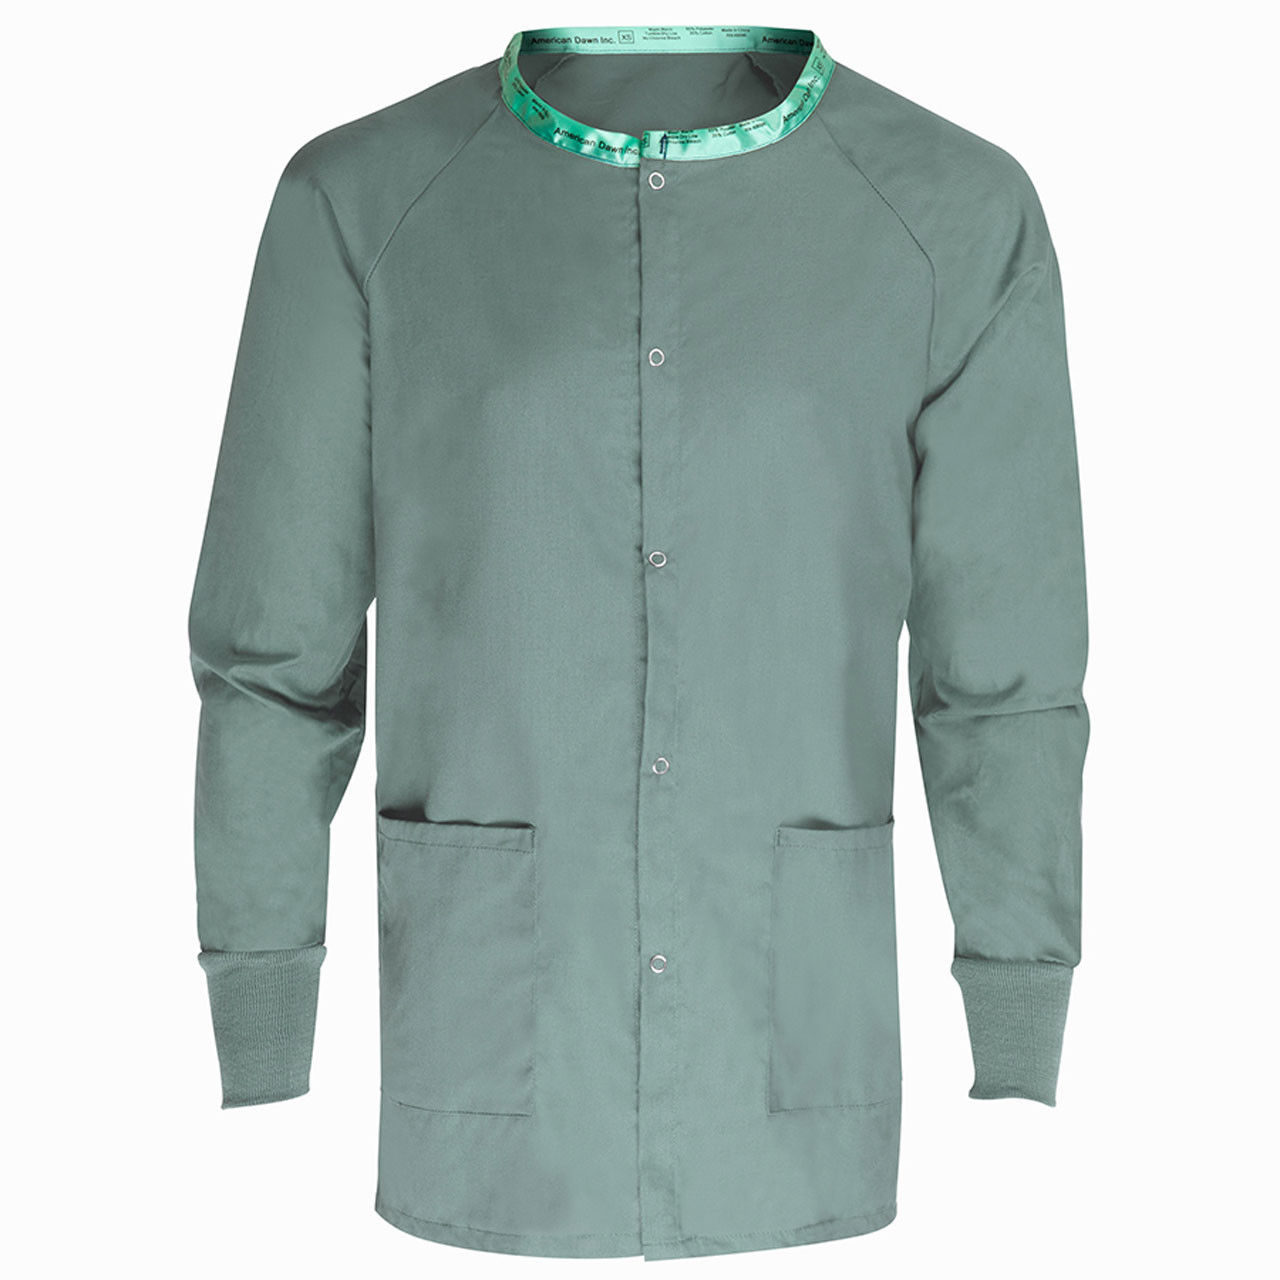 Scrub Warmup Jacket 100% Spun Polyester, Misty Green - Case of 24 Questions & Answers